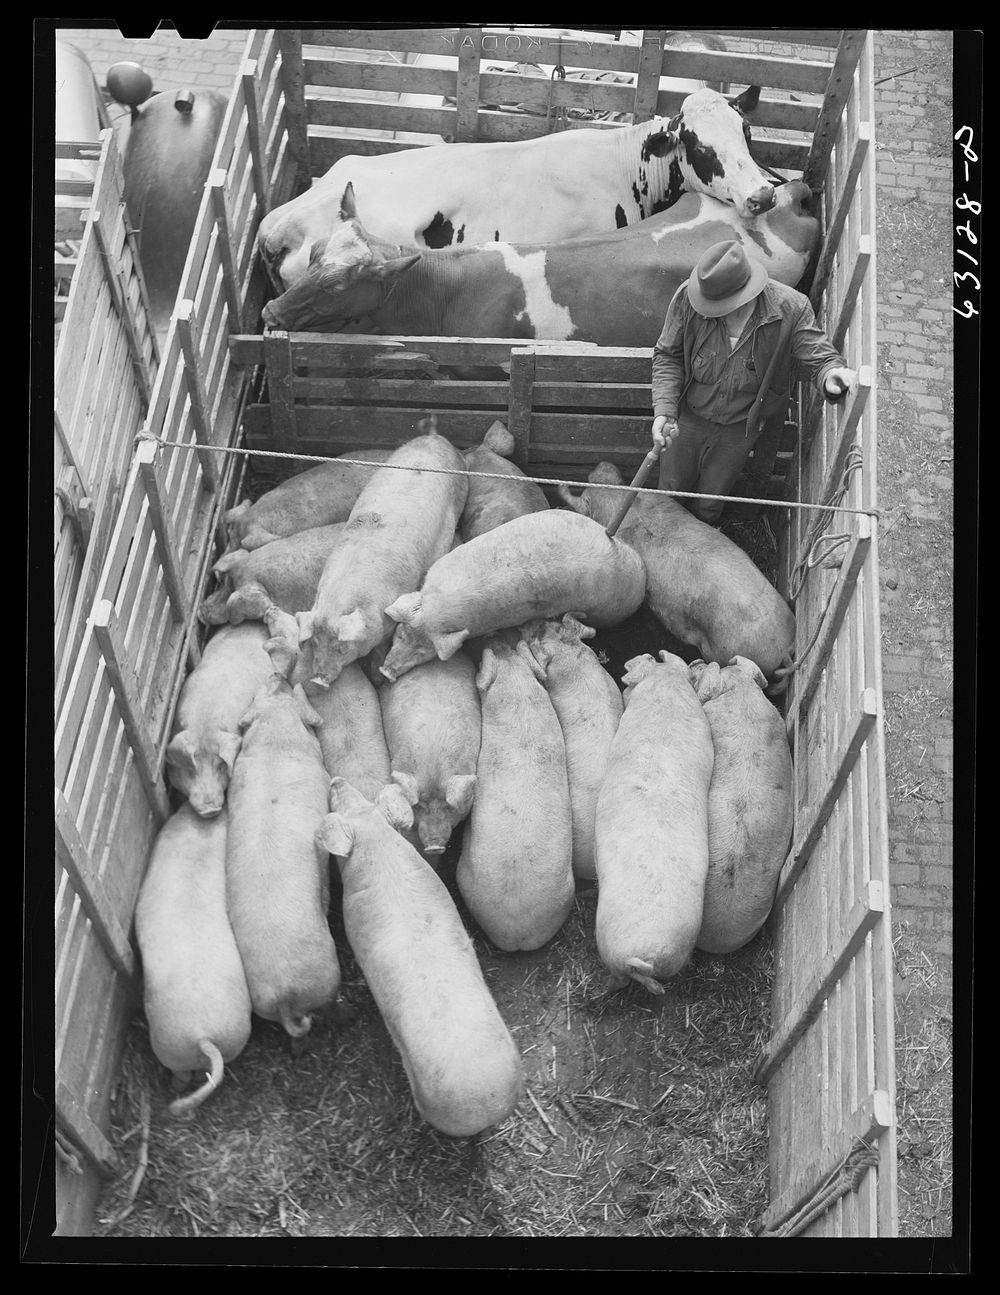 Unloading pigs from truck. Union Stockyards, Chicago, Illinois. Sourced from the Library of Congress.